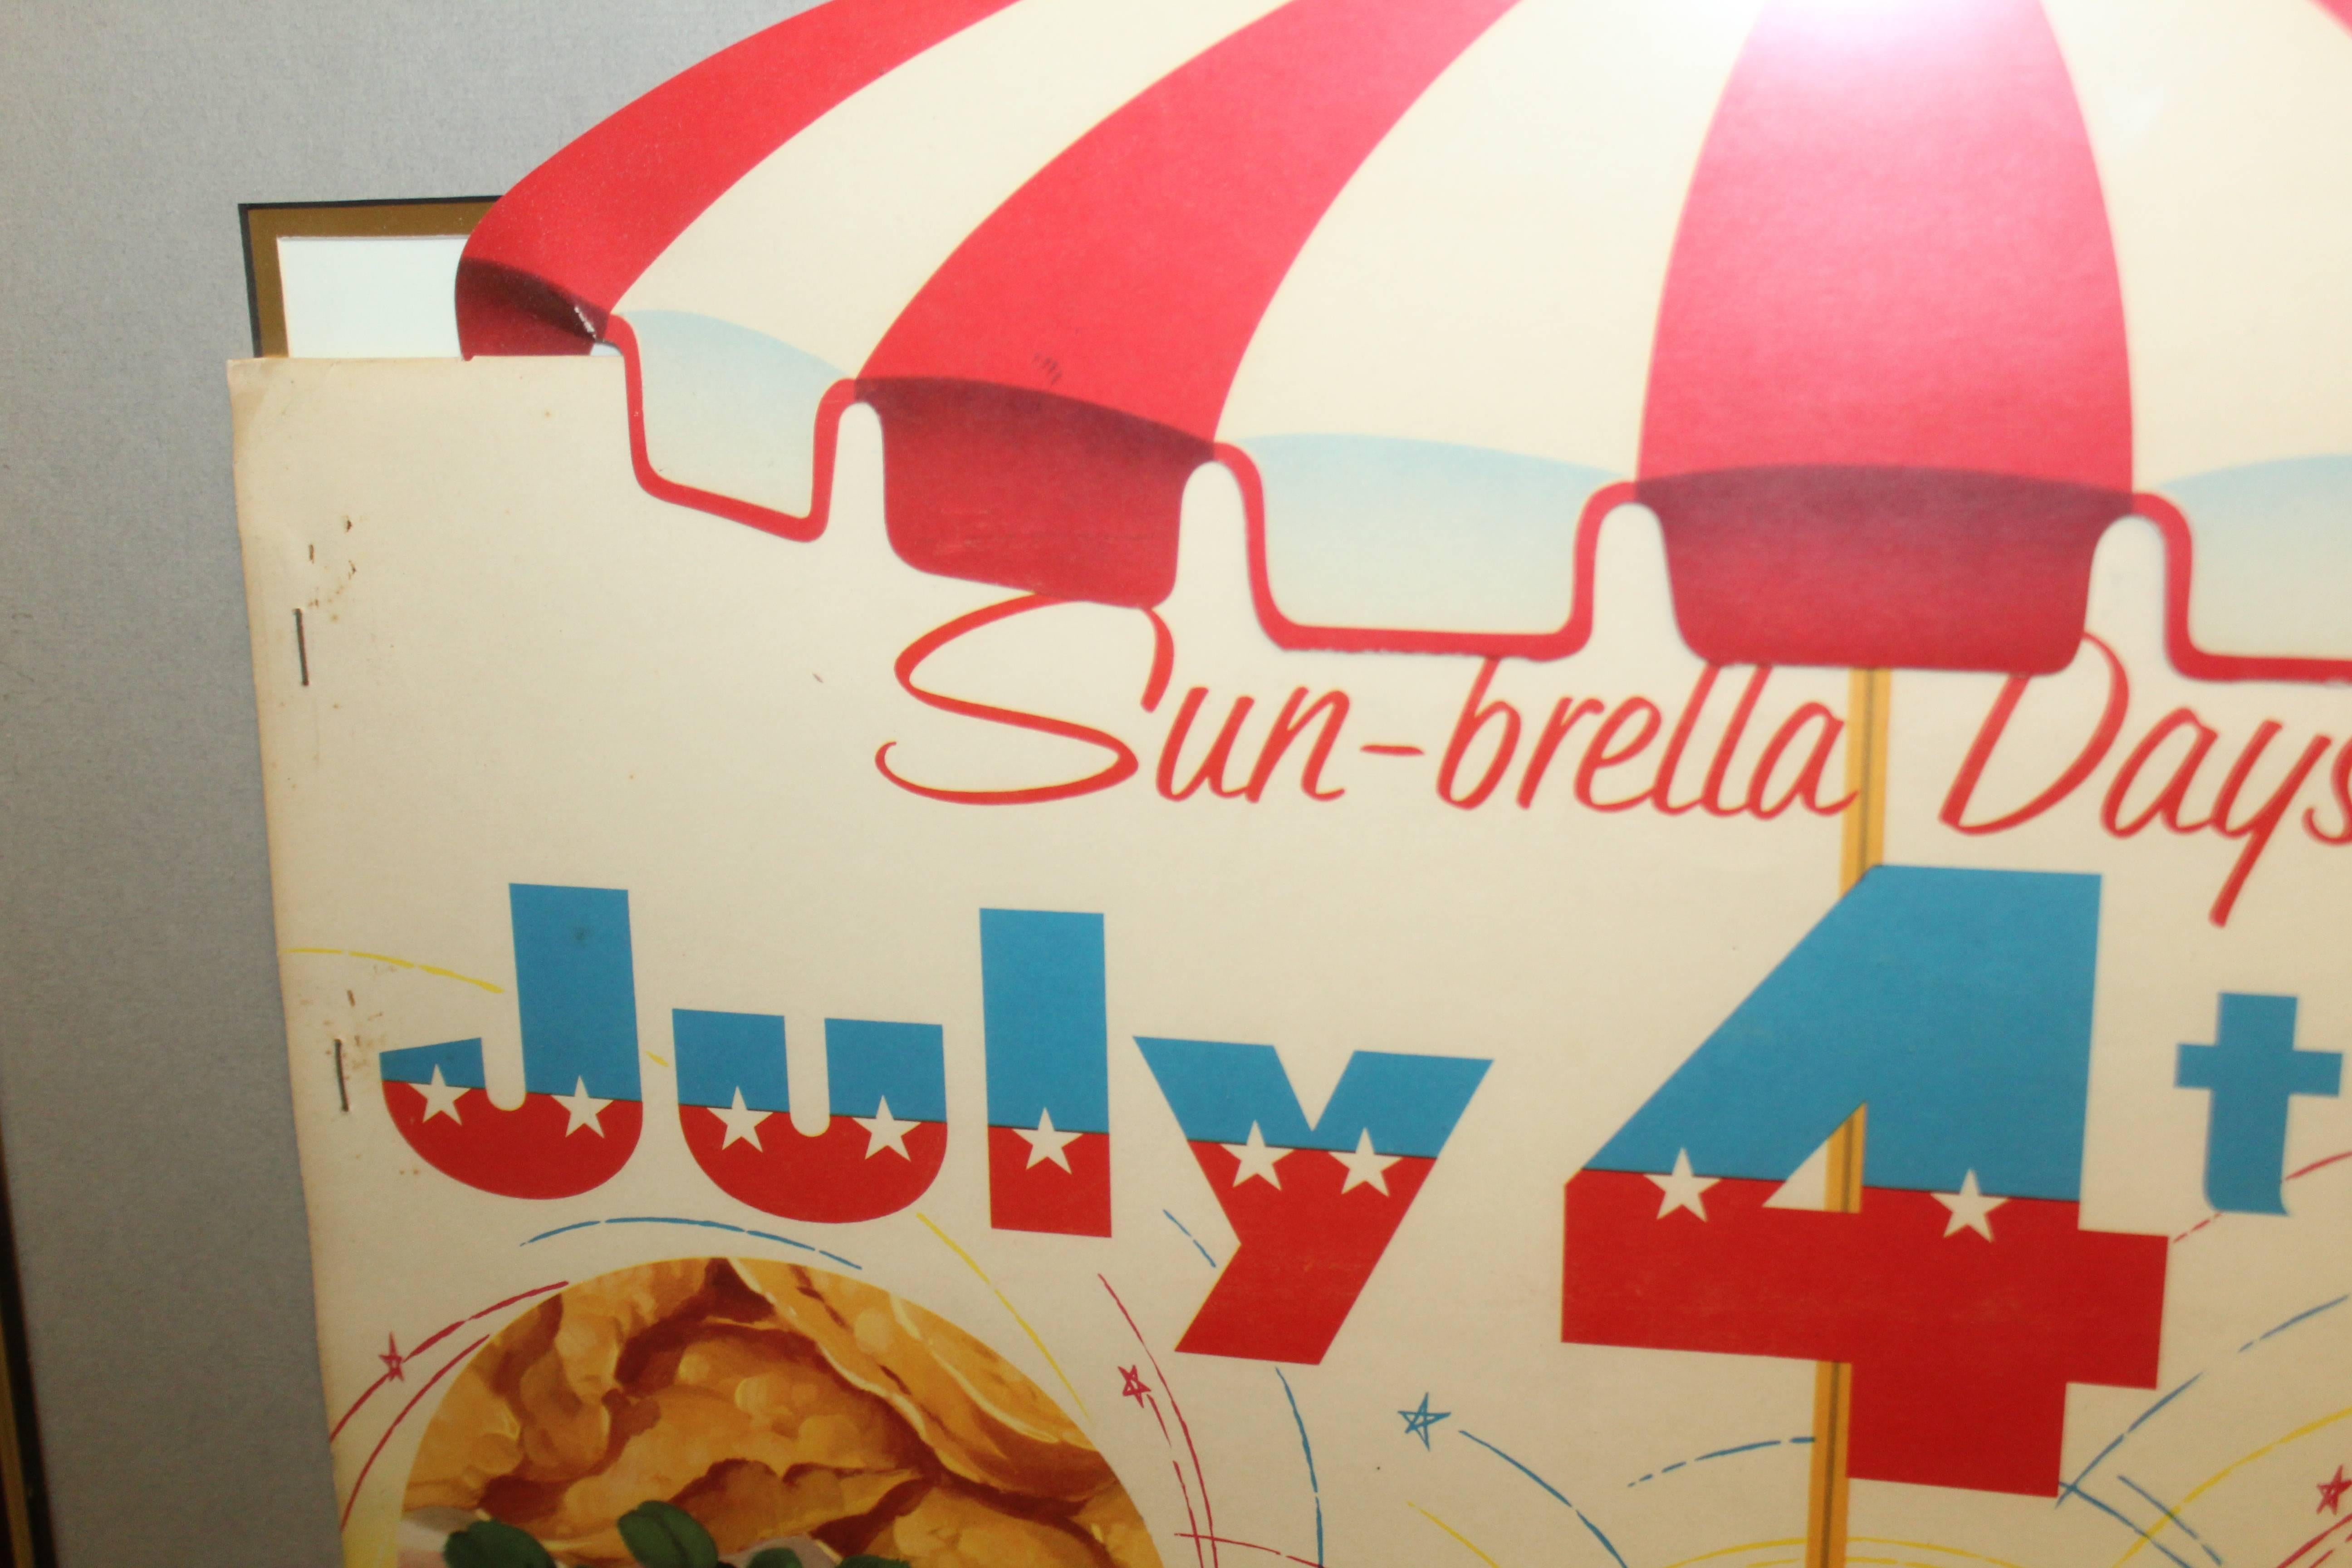 Just in time for 4th of July! This awesome 3D advertising was a simple way to show how coca cola advertised in most super markets. Colors are still vibrant and the umbrella gives the three-dimensional look to the sign.